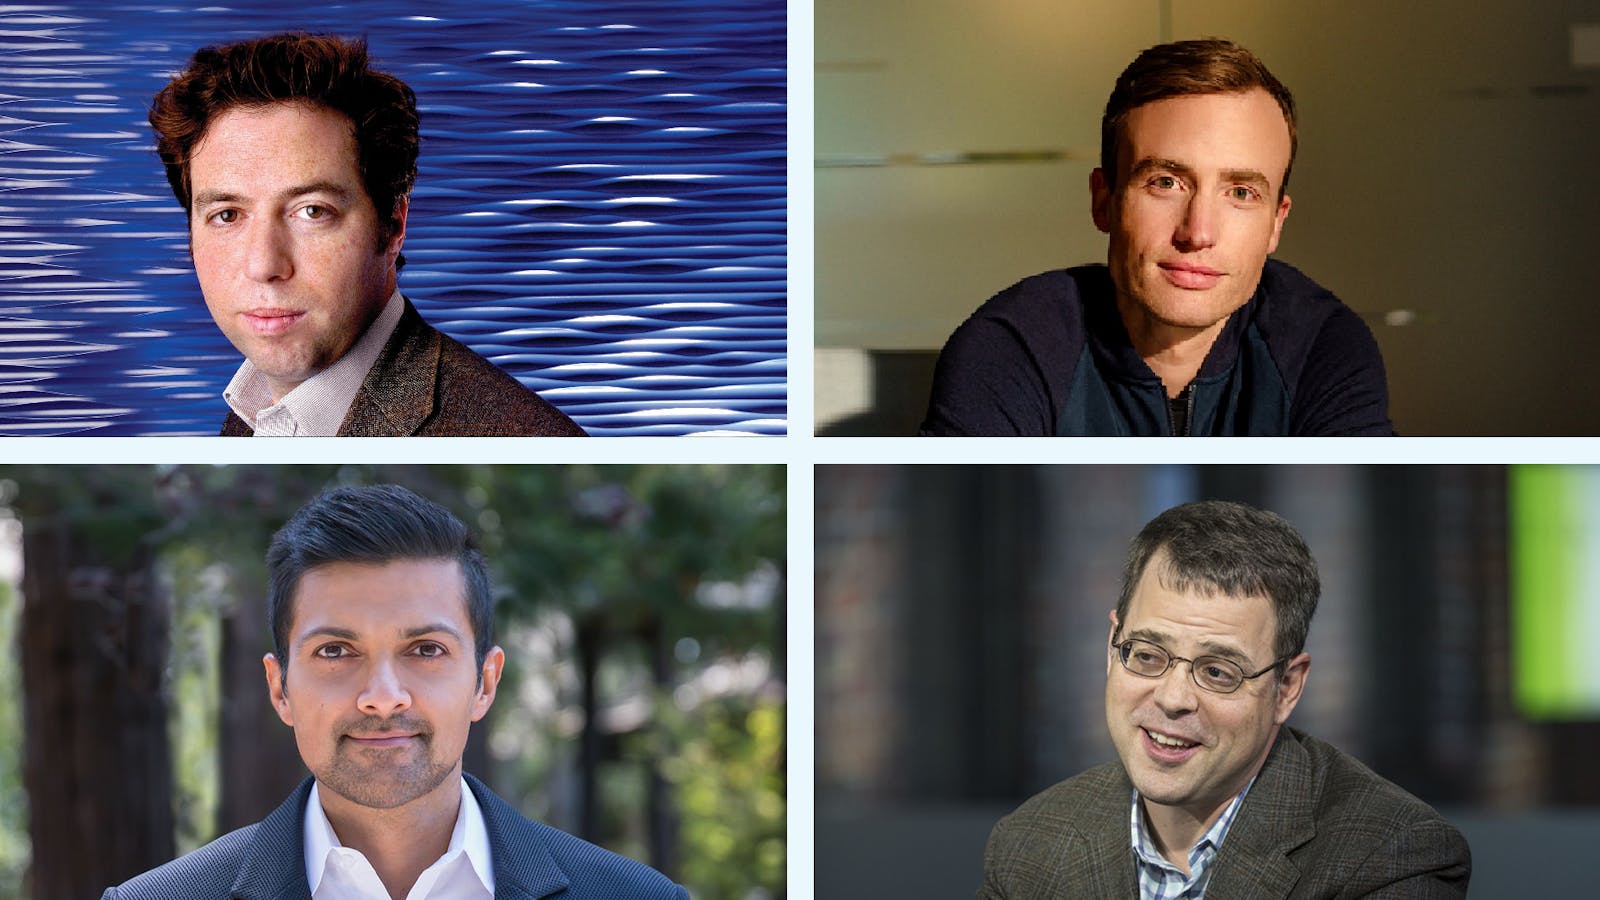 From top left, clockwise: Index Ventures' Danny Rimer, Sequoia Capital's Andrew Reed, Kleiner Perkins' Mamoon Hamid, and Greylock Partners' John Lilly. Photos by Bloomberg, Sequoia Capital and Kleiner Perkins